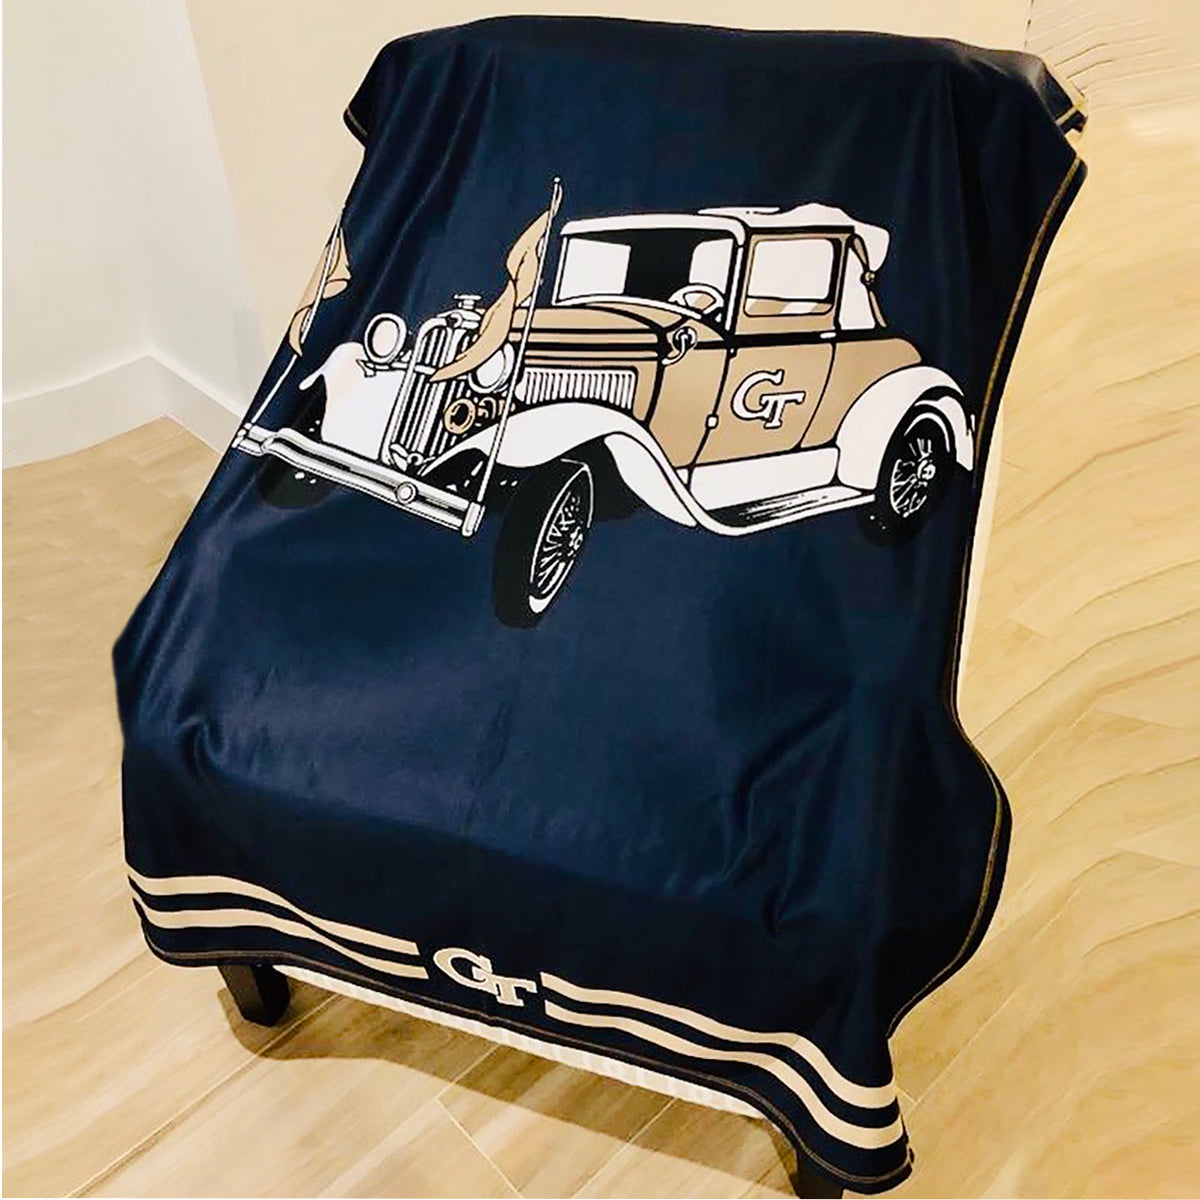 Pittsburgh Panters UP Game Day Soft Premium Fleece Blue Throw Blanket 40 x 58 Logo and Stripes